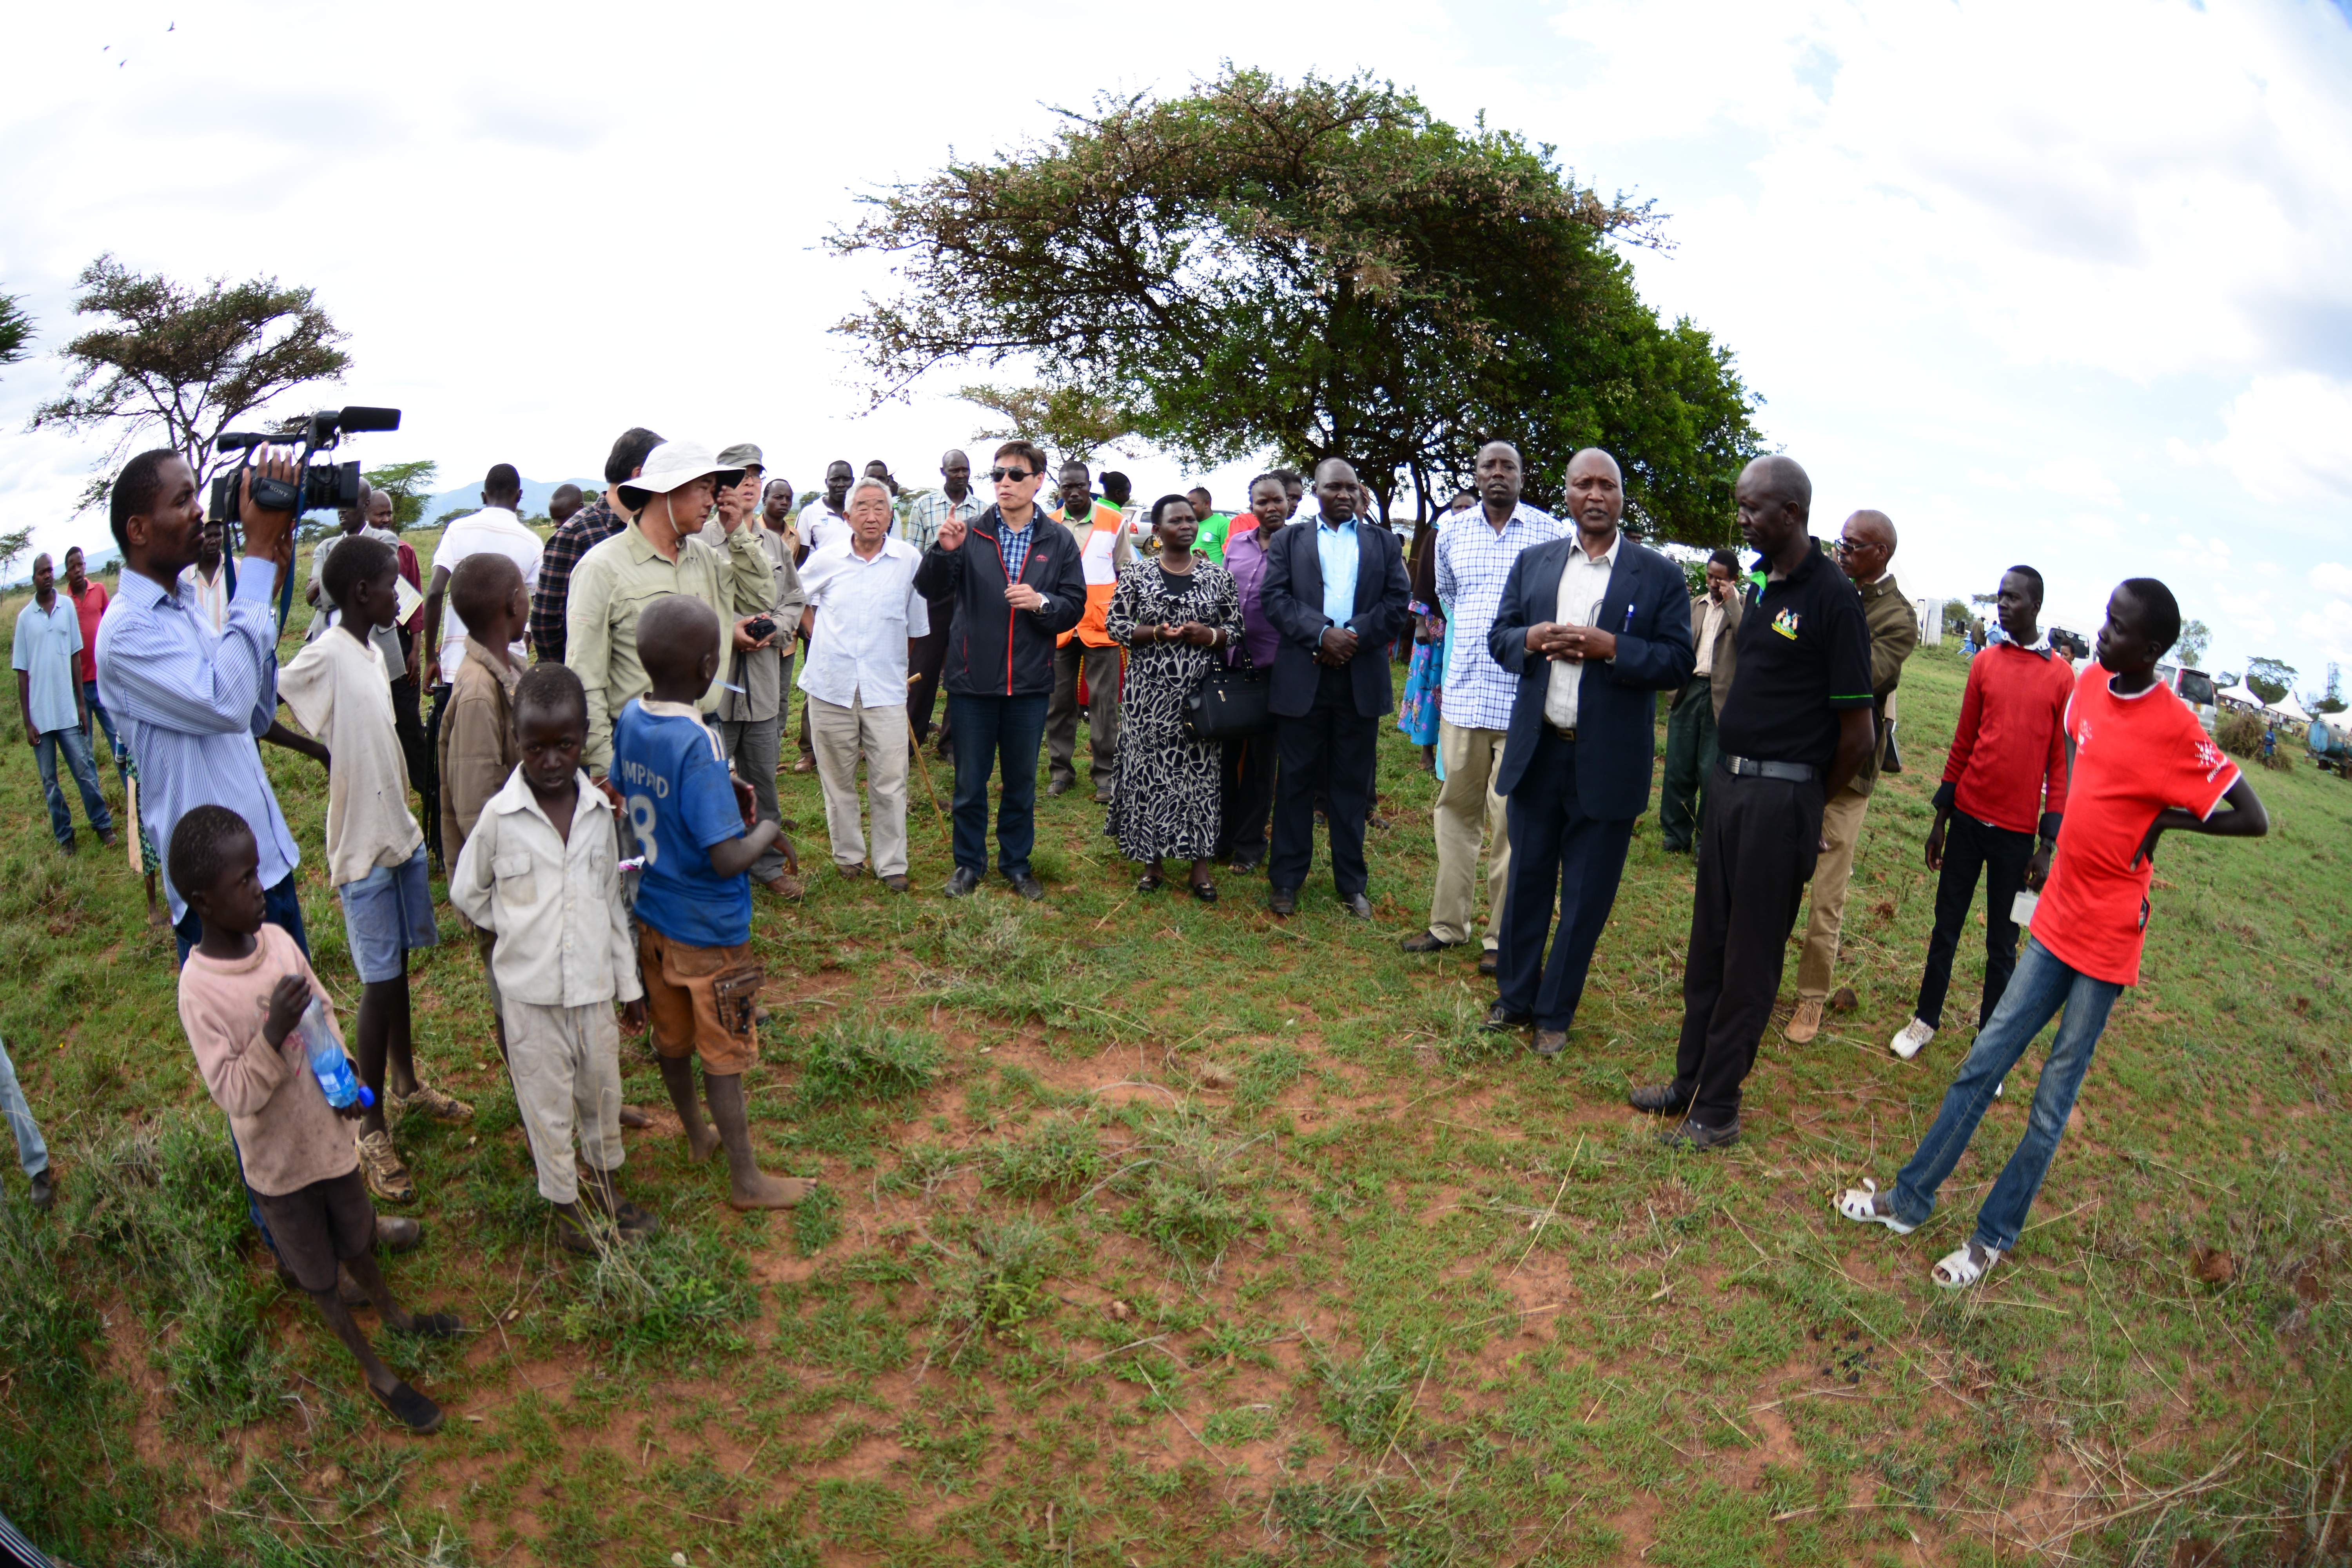 Lei Jiaqiang (C) discusses restoration techniques of degraded grasslands with local experts in Baringo County, Kenya, November 20, 2015. /Courtesy of Lei Jiaqiang